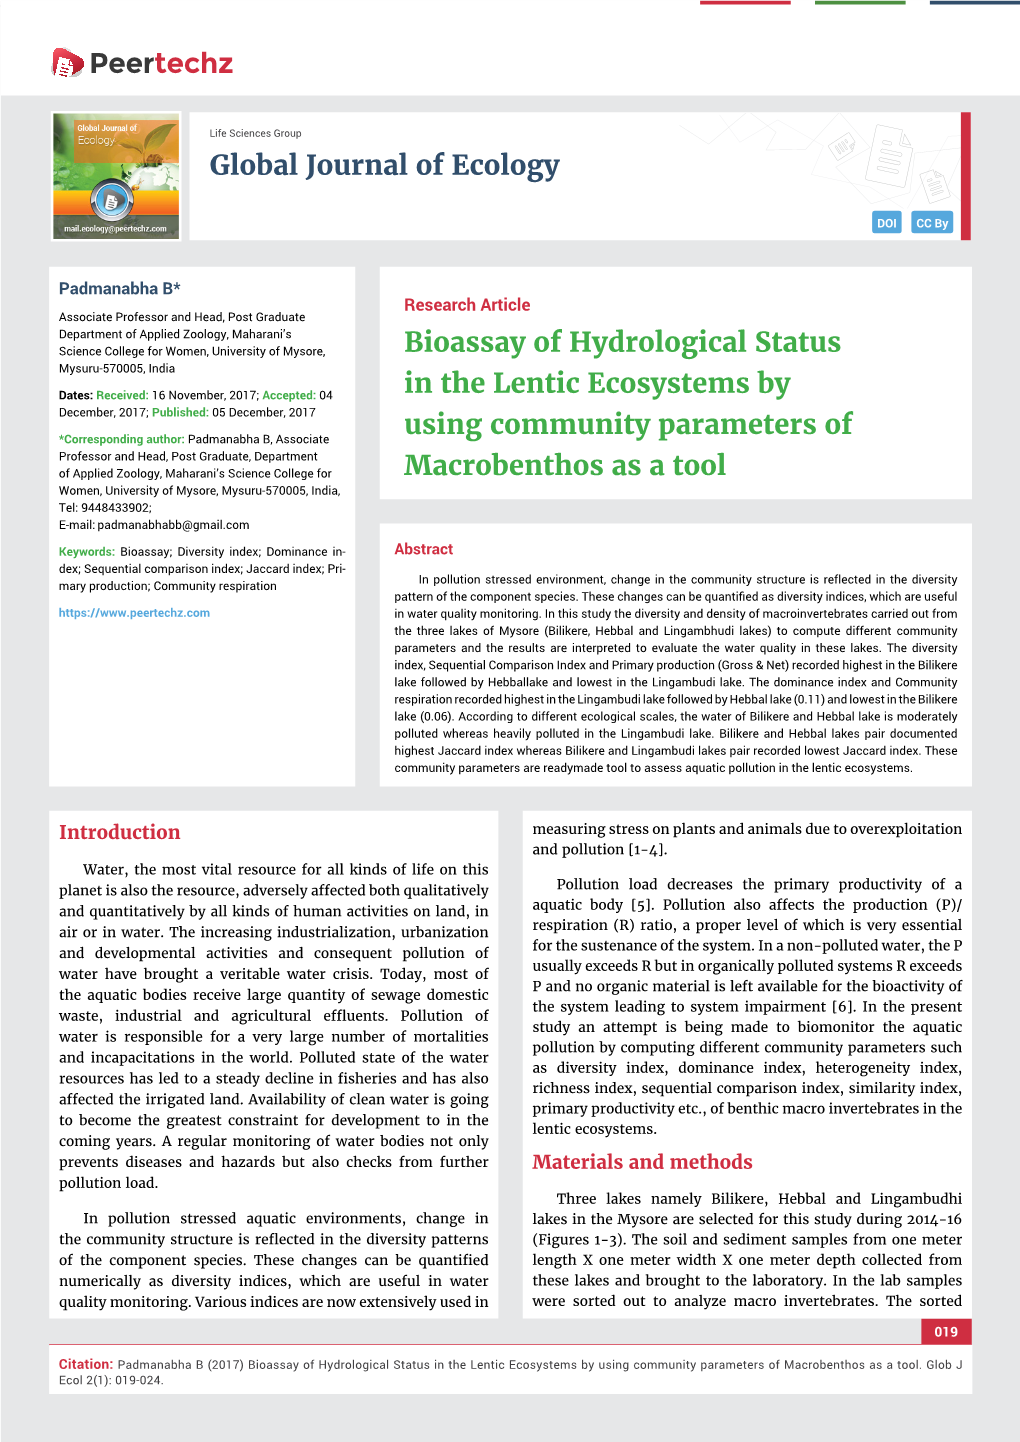 Global Journal of Ecology Bioassay of Hydrological Status in the Lentic